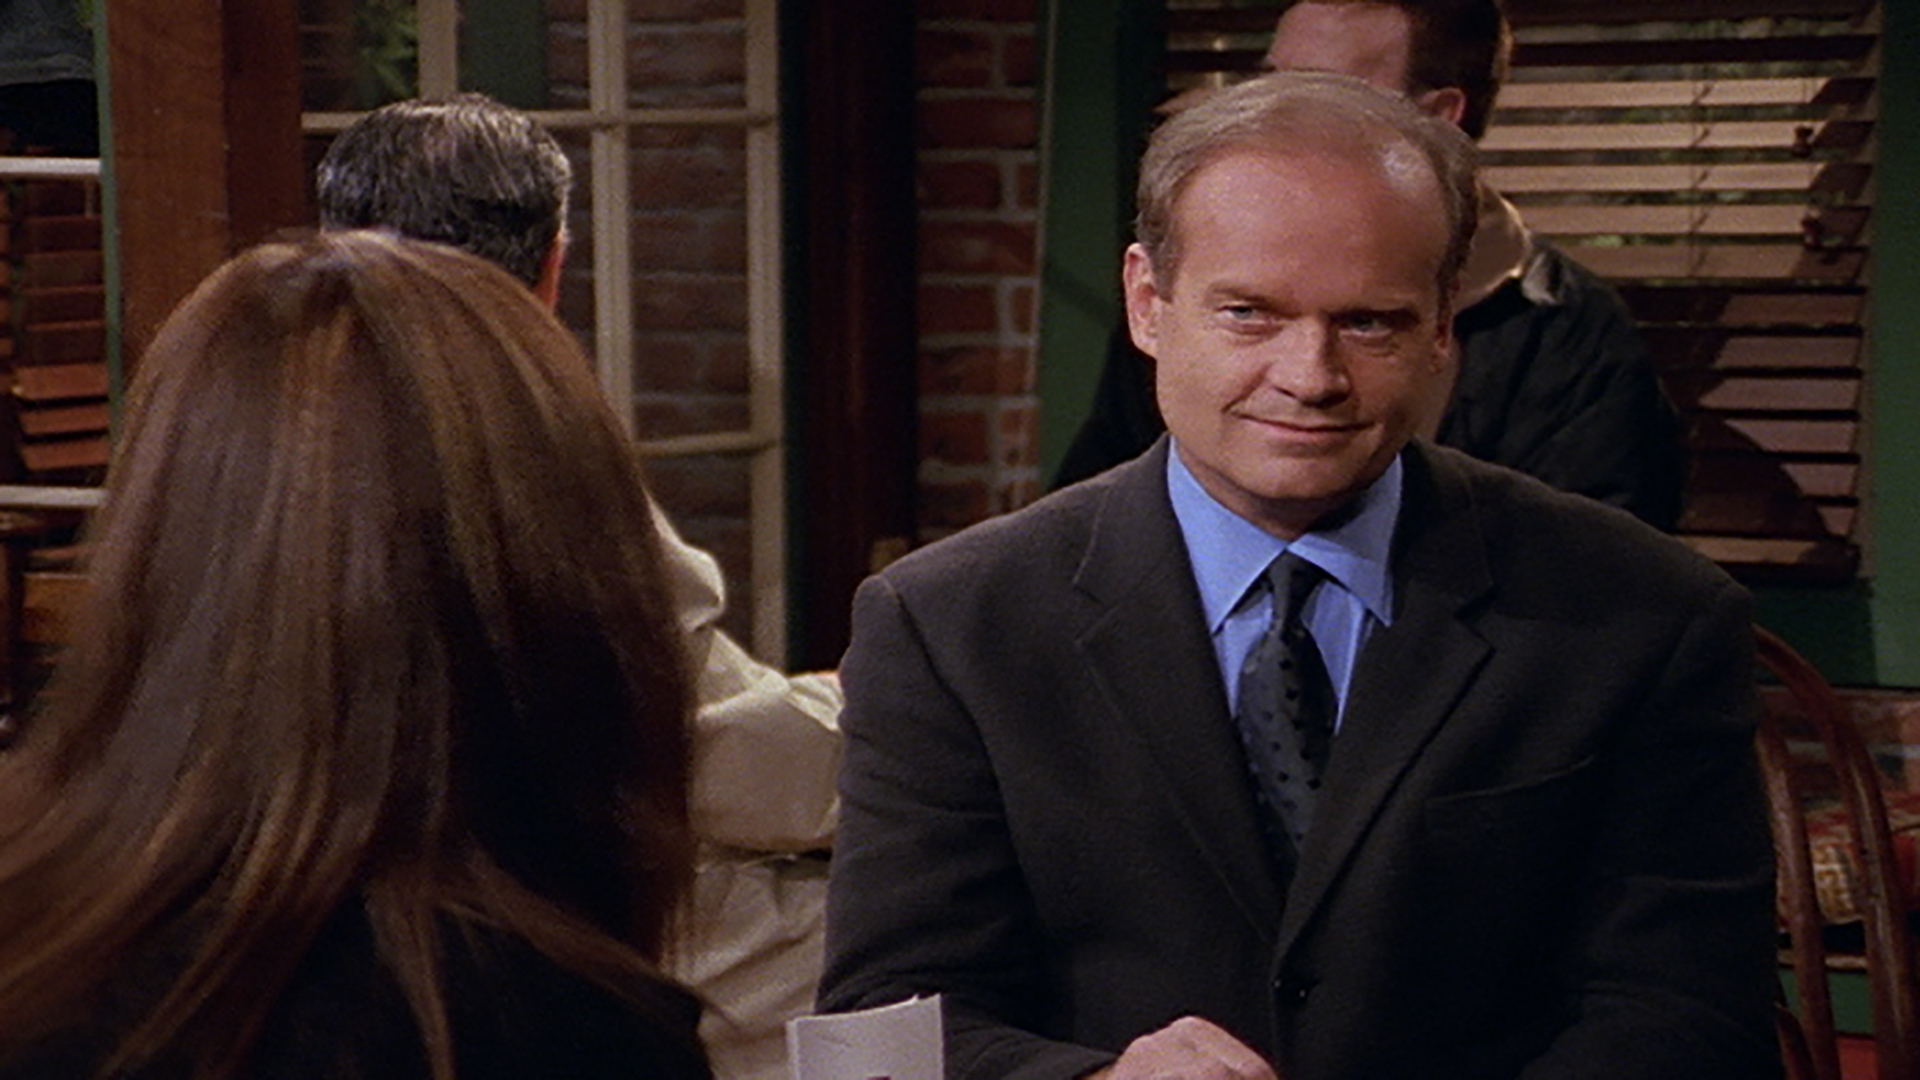 Watch Frasier Season 9 Episode 24 Moons Over Seattle Full show on CBS All Access